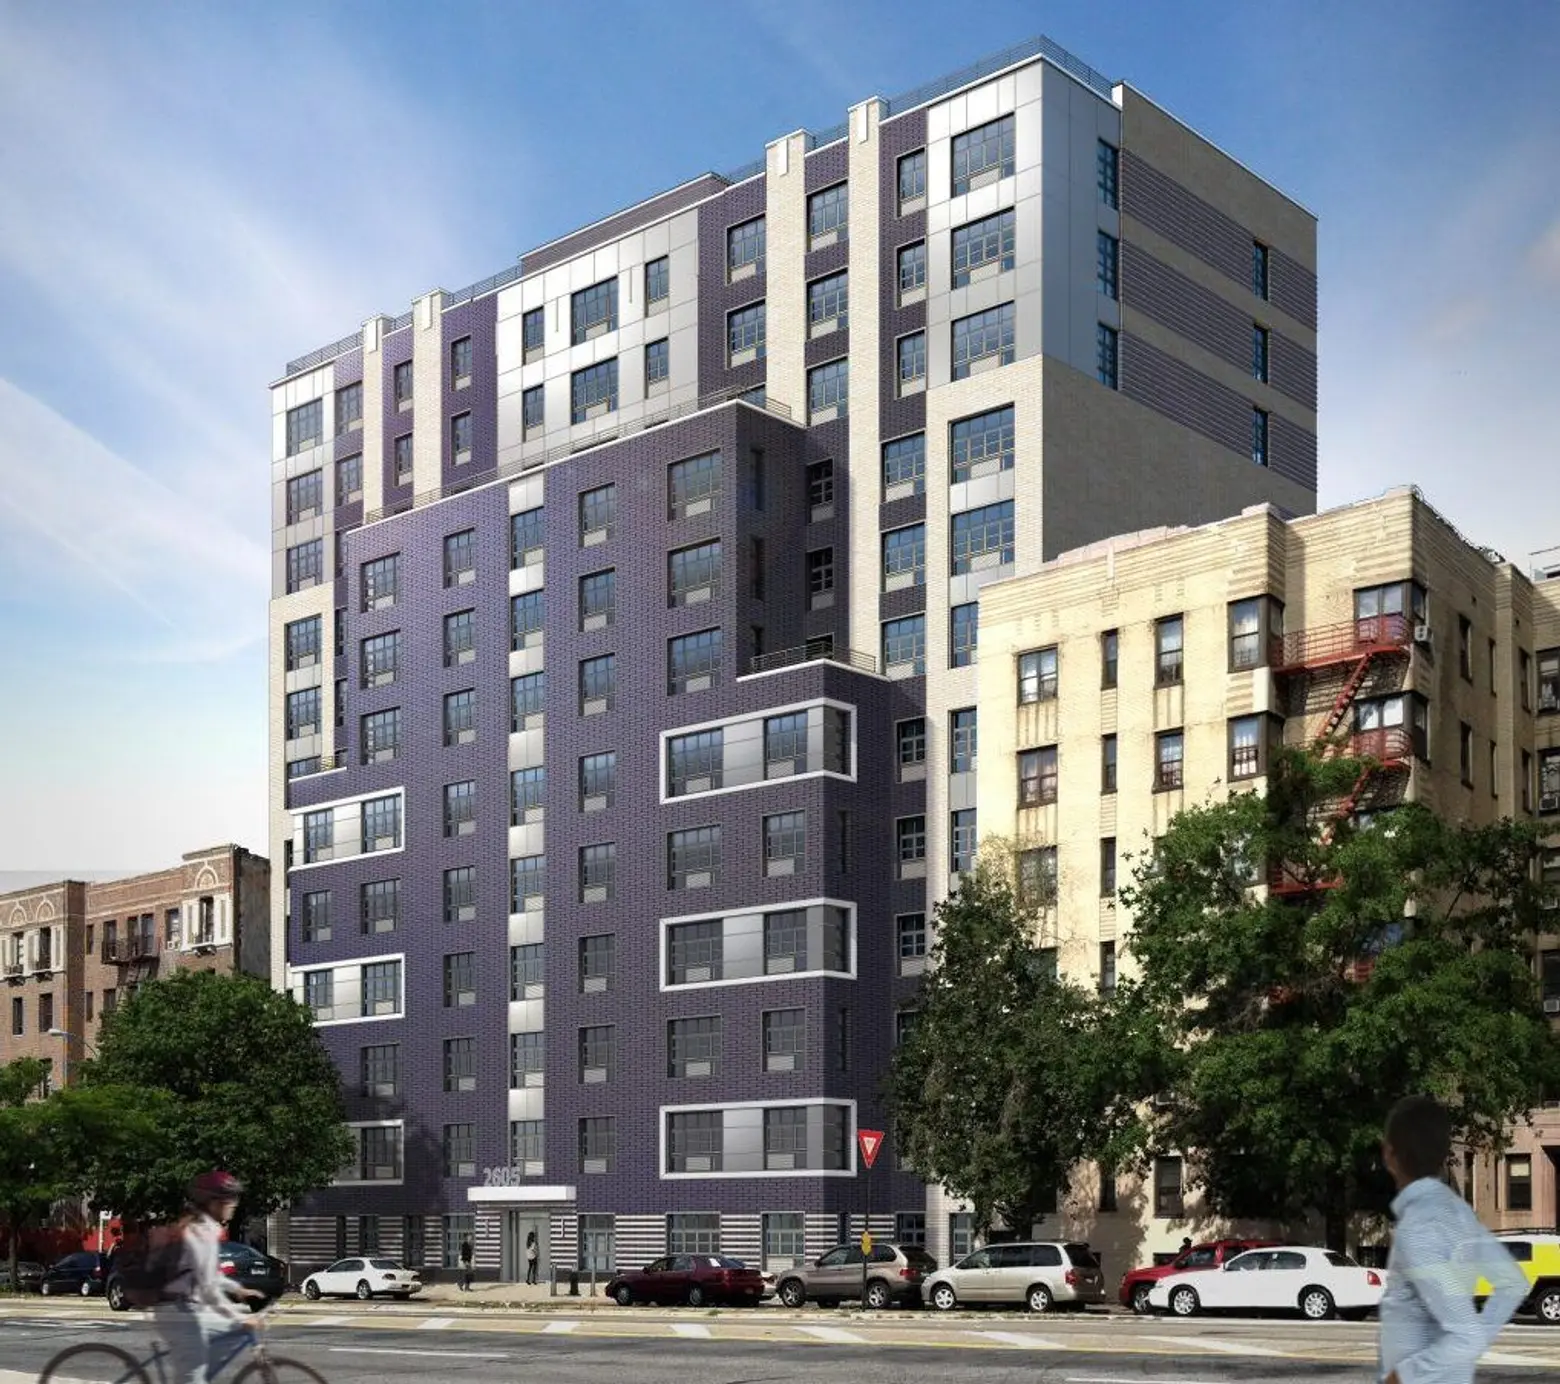 Apply for 93 low- and middle-income apartments along the Grand Concourse from $822/month